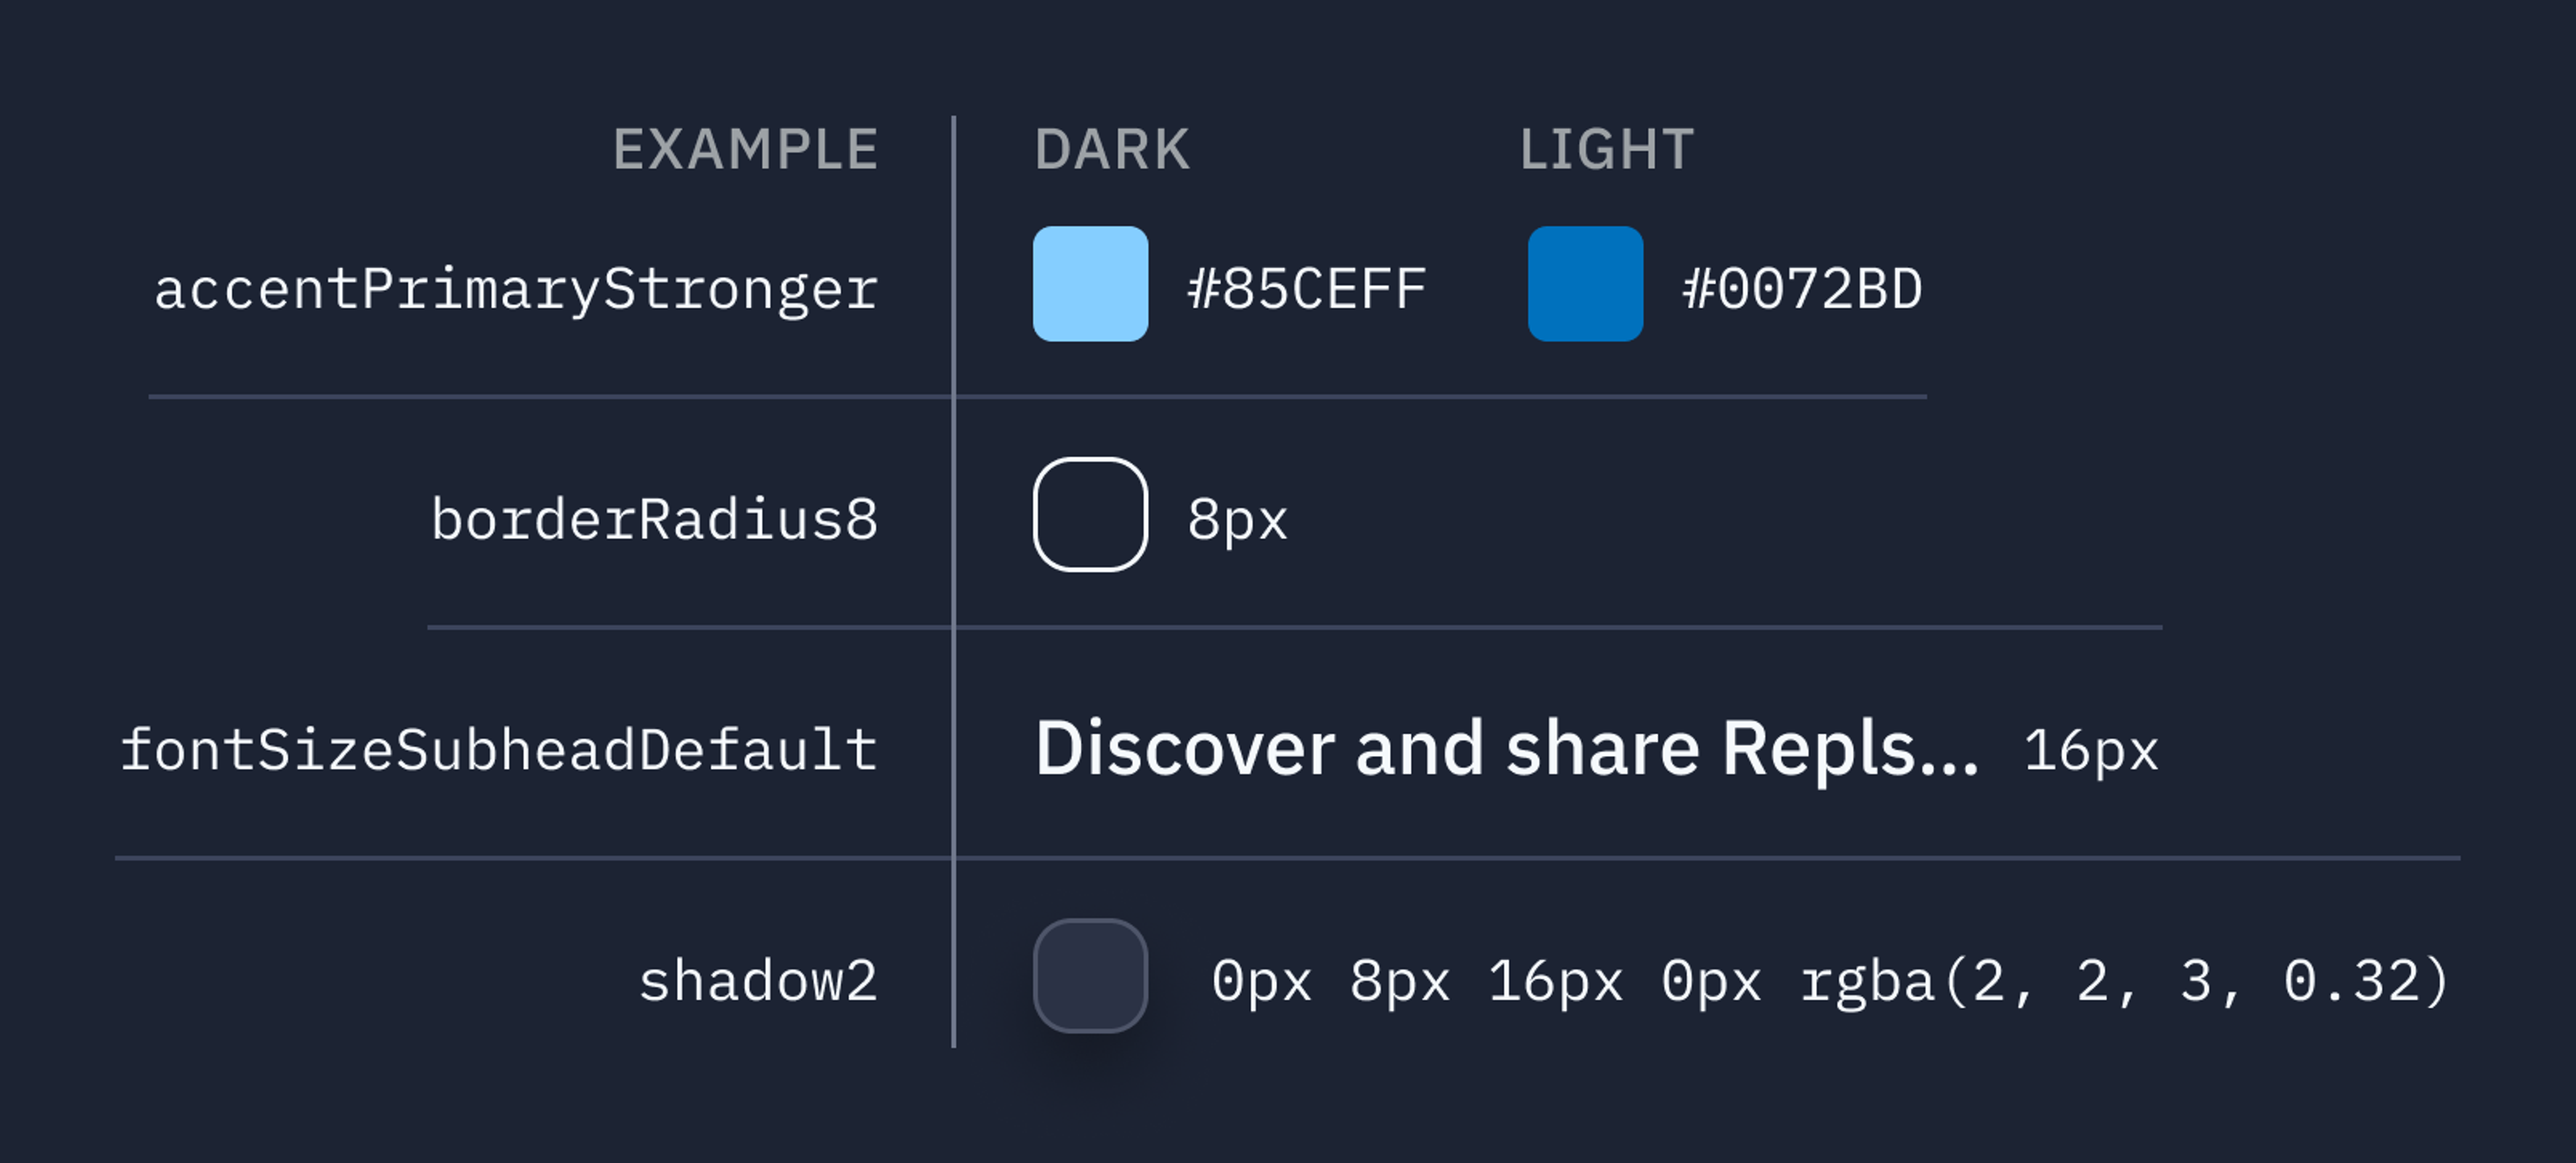 Examples of tokens: accentPrimaryStronger corresponds to a light blue on Dark theme and dark blue on Light theme; borderRadius8 corresponds to rounded corners of 8px radius; fontSizeSubheadDefault corresponds to a font size of 16px; and shadow2 corresponds to a dim but noticable drop shadow.